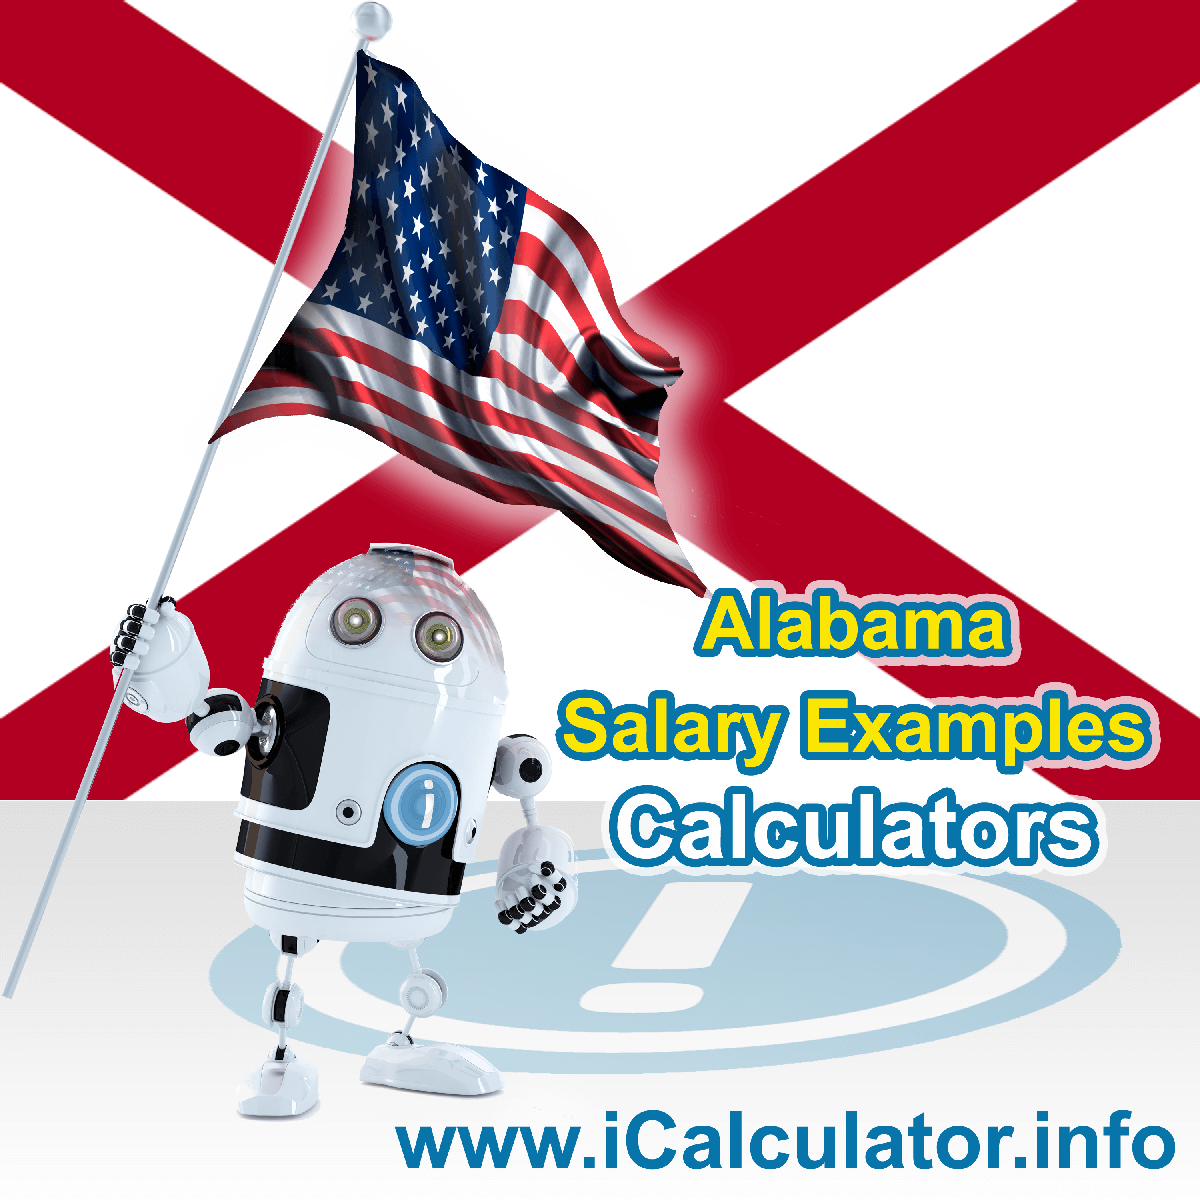 Alabama Salary Example for $ 150,000.00 in 2023 | iCalculator™ | $ 150,000.00 salary example for employee and employer paying Alabama State tincome taxes. Detailed salary after tax calculation including Alabama State Tax, Federal State Tax, Medicare Deductions, Social Security, Capital Gains and other income tax and salary deductions complete with supporting Alabama state tax tables 